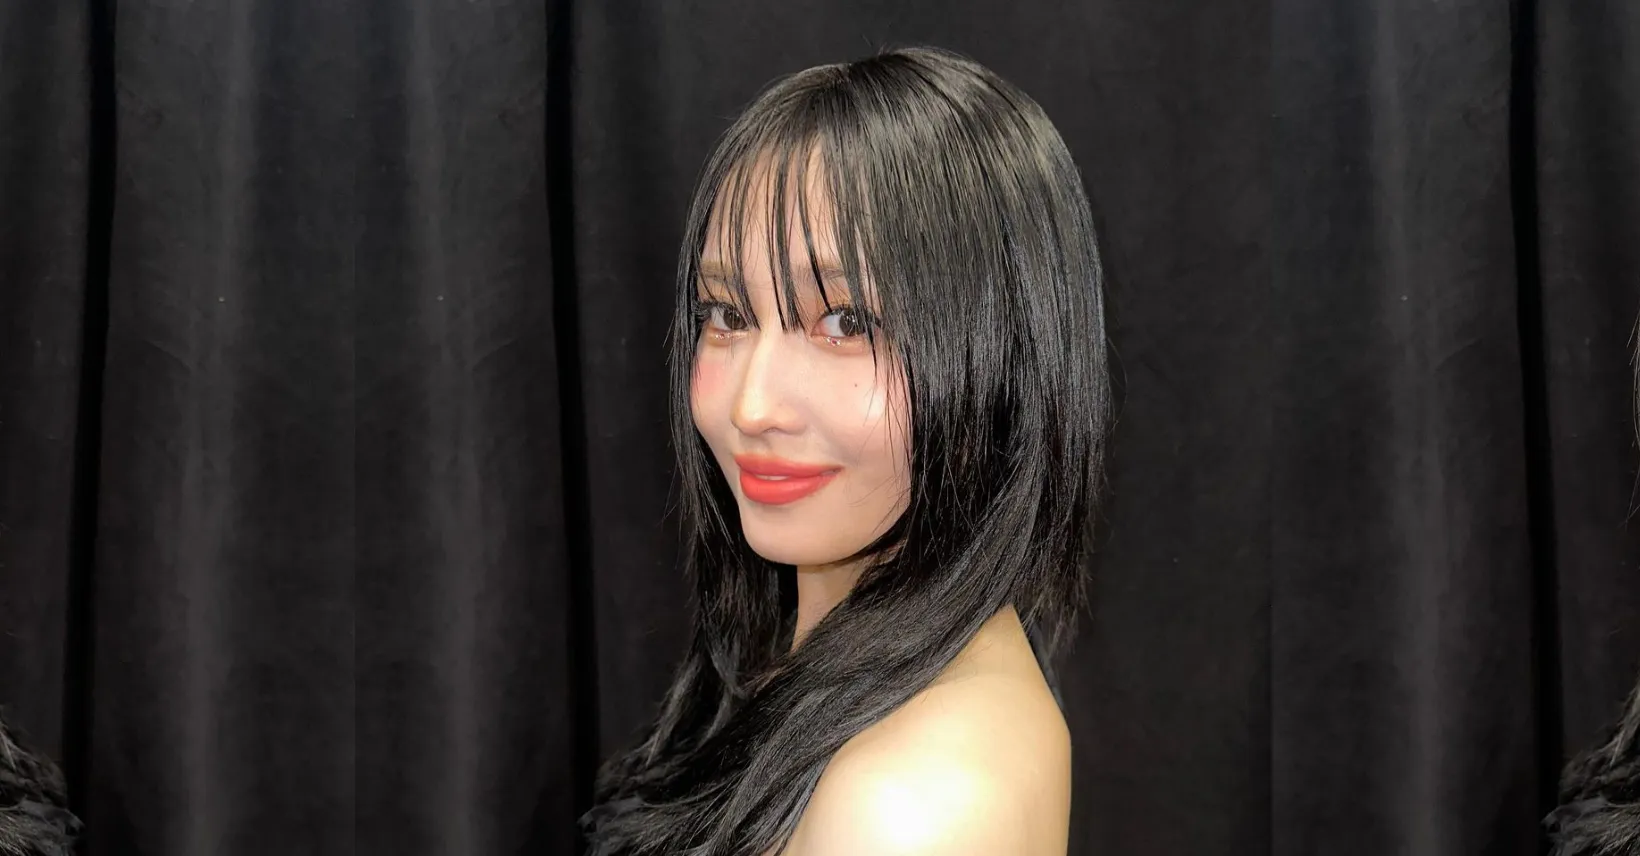 Momo's Wet and Seductive Beauty Steals the Show